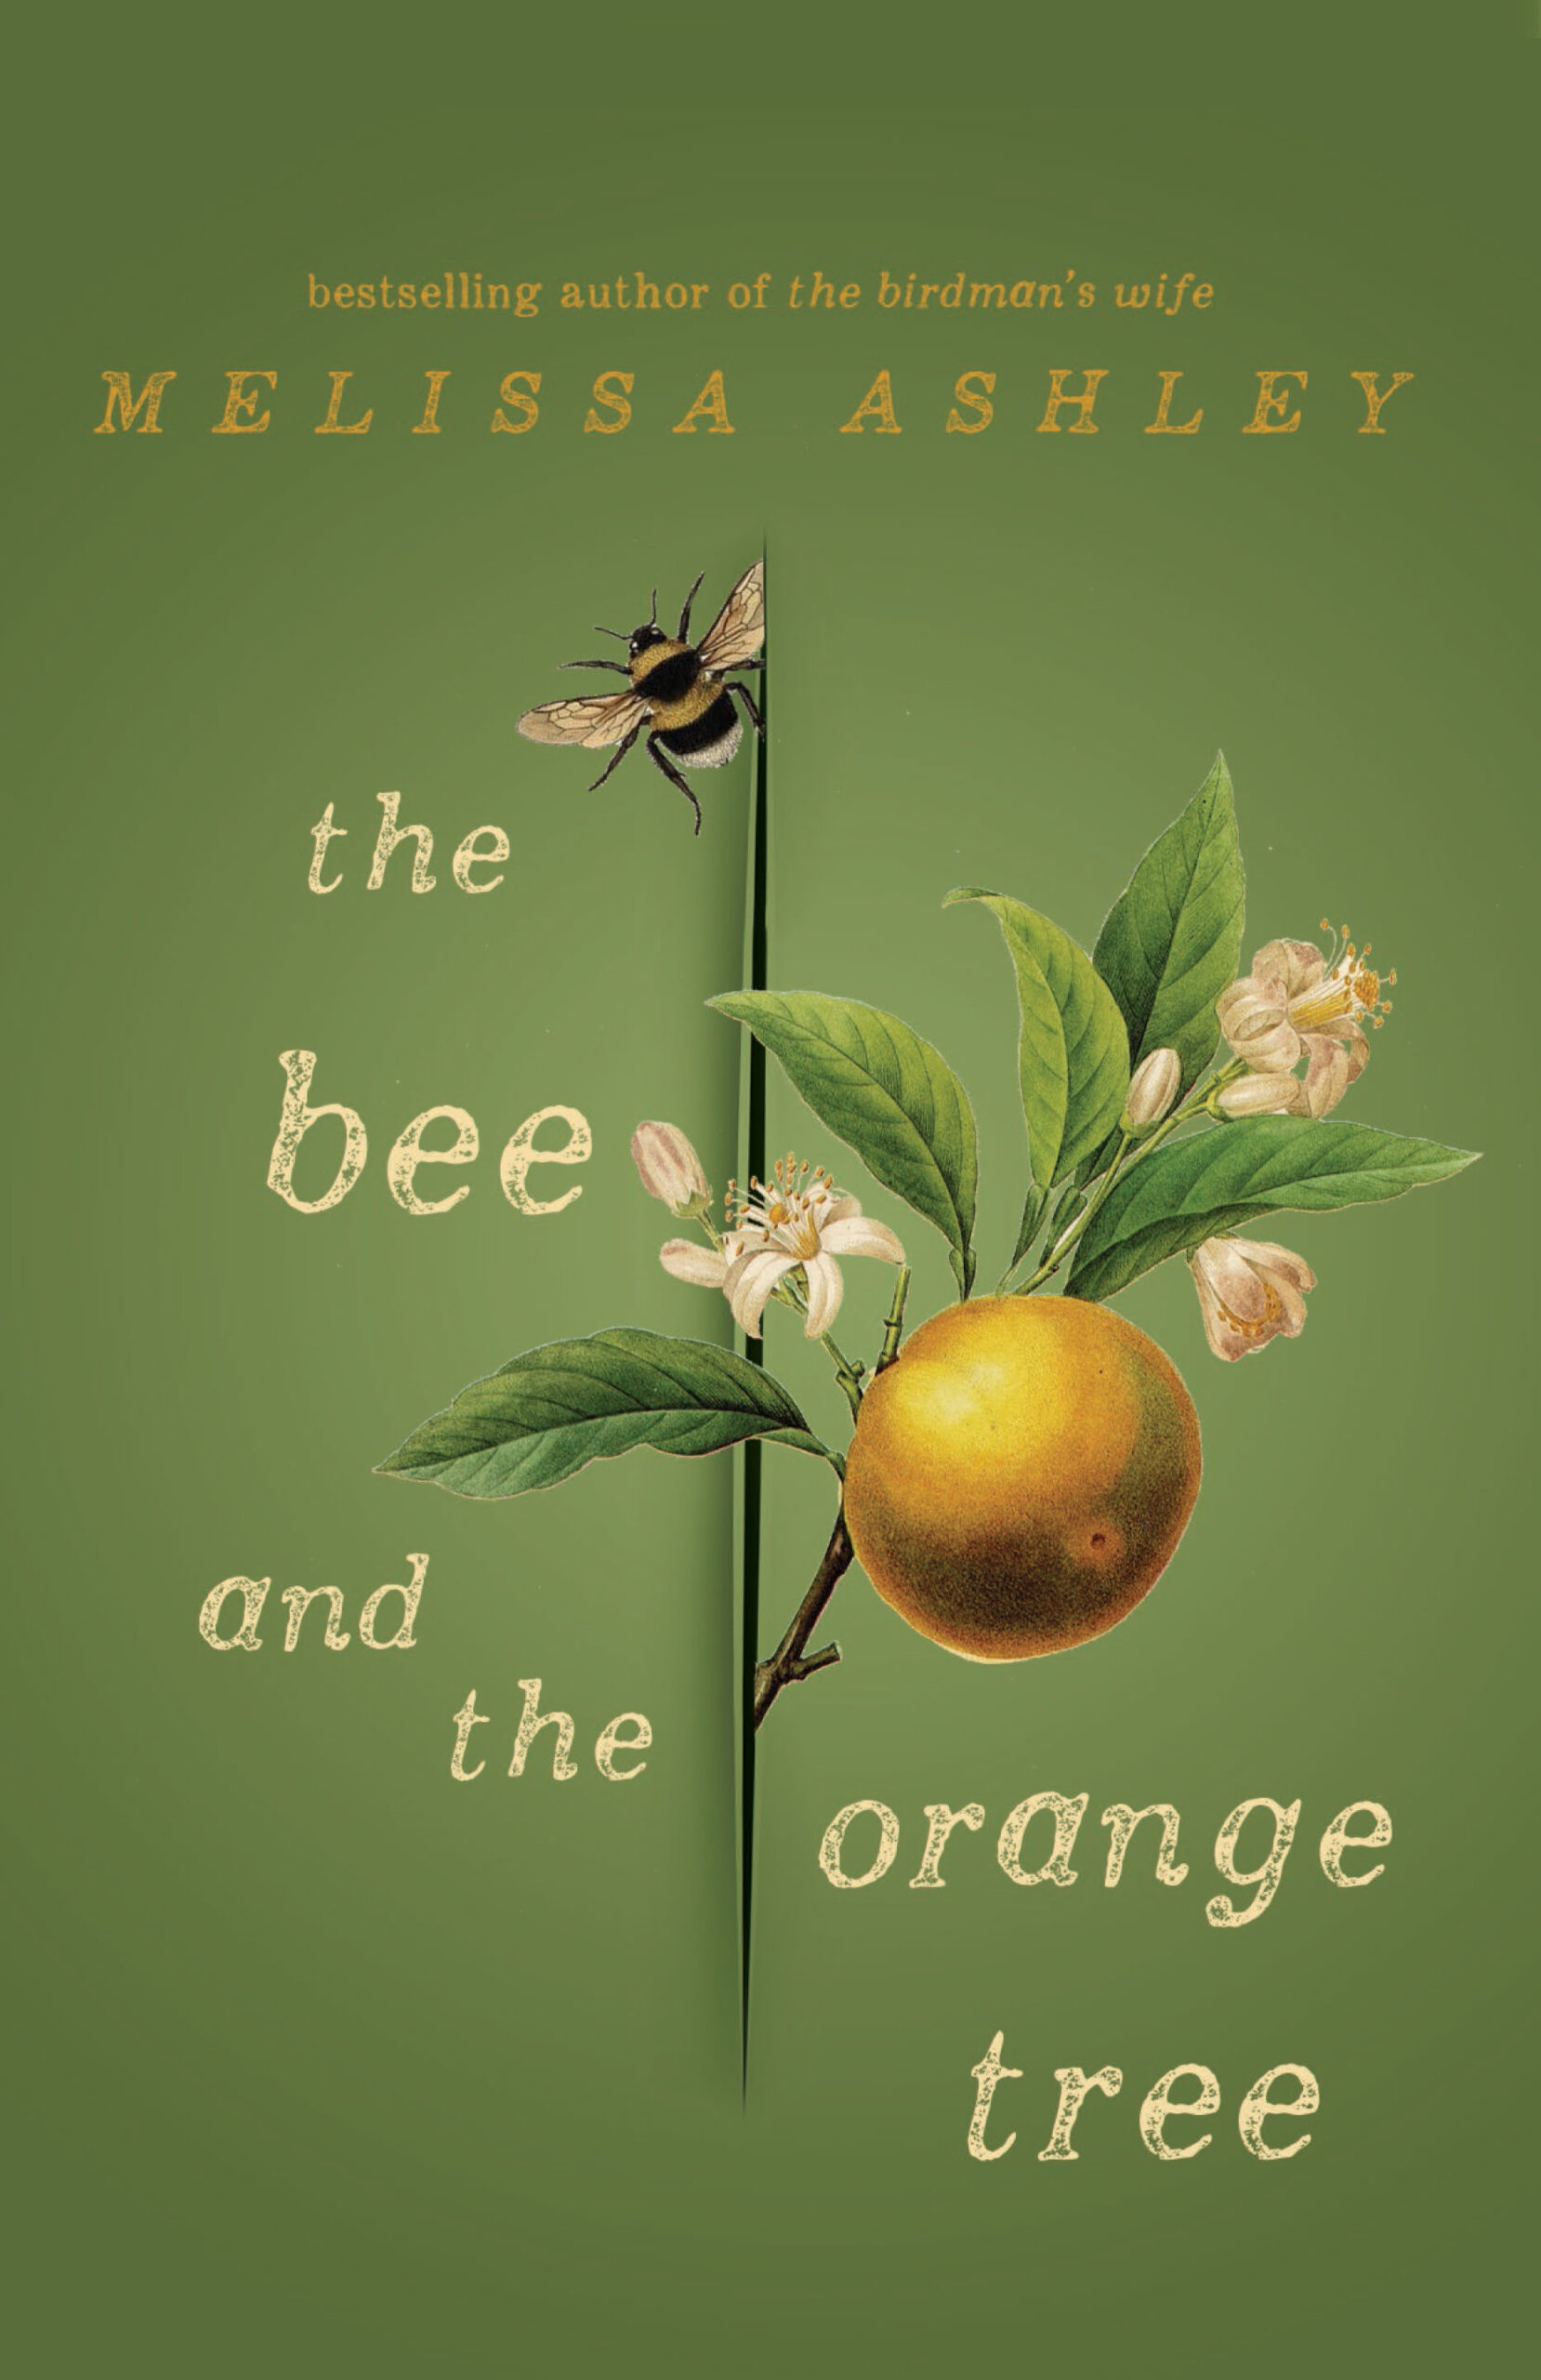 Q&A with Melissa Ashley on her novel ‘The Bee and the Orange Tree’